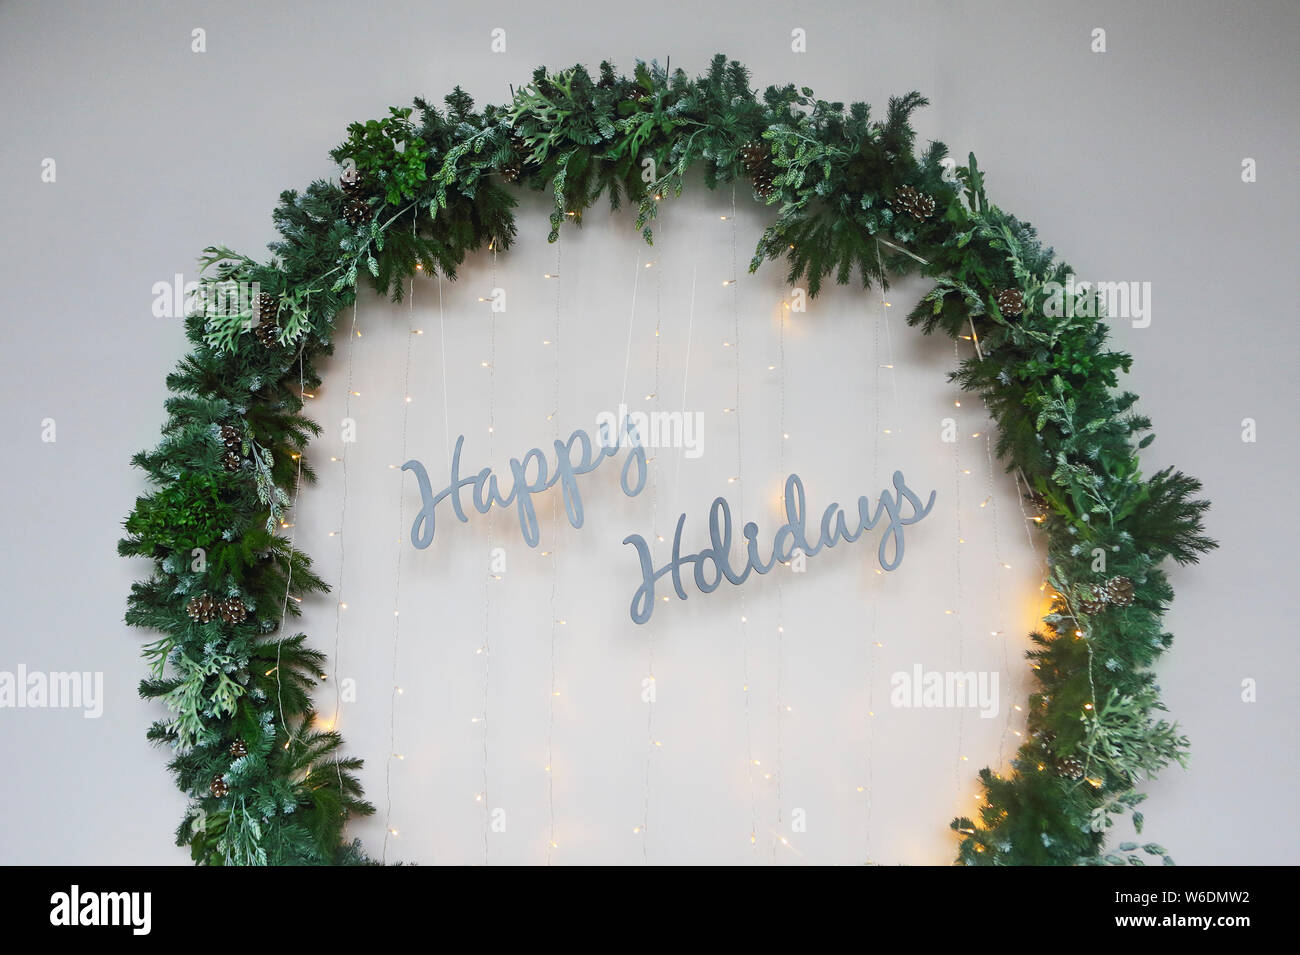 Big Christmas wreath by the wall with sign Happy Holidays. Close up Stock Photo